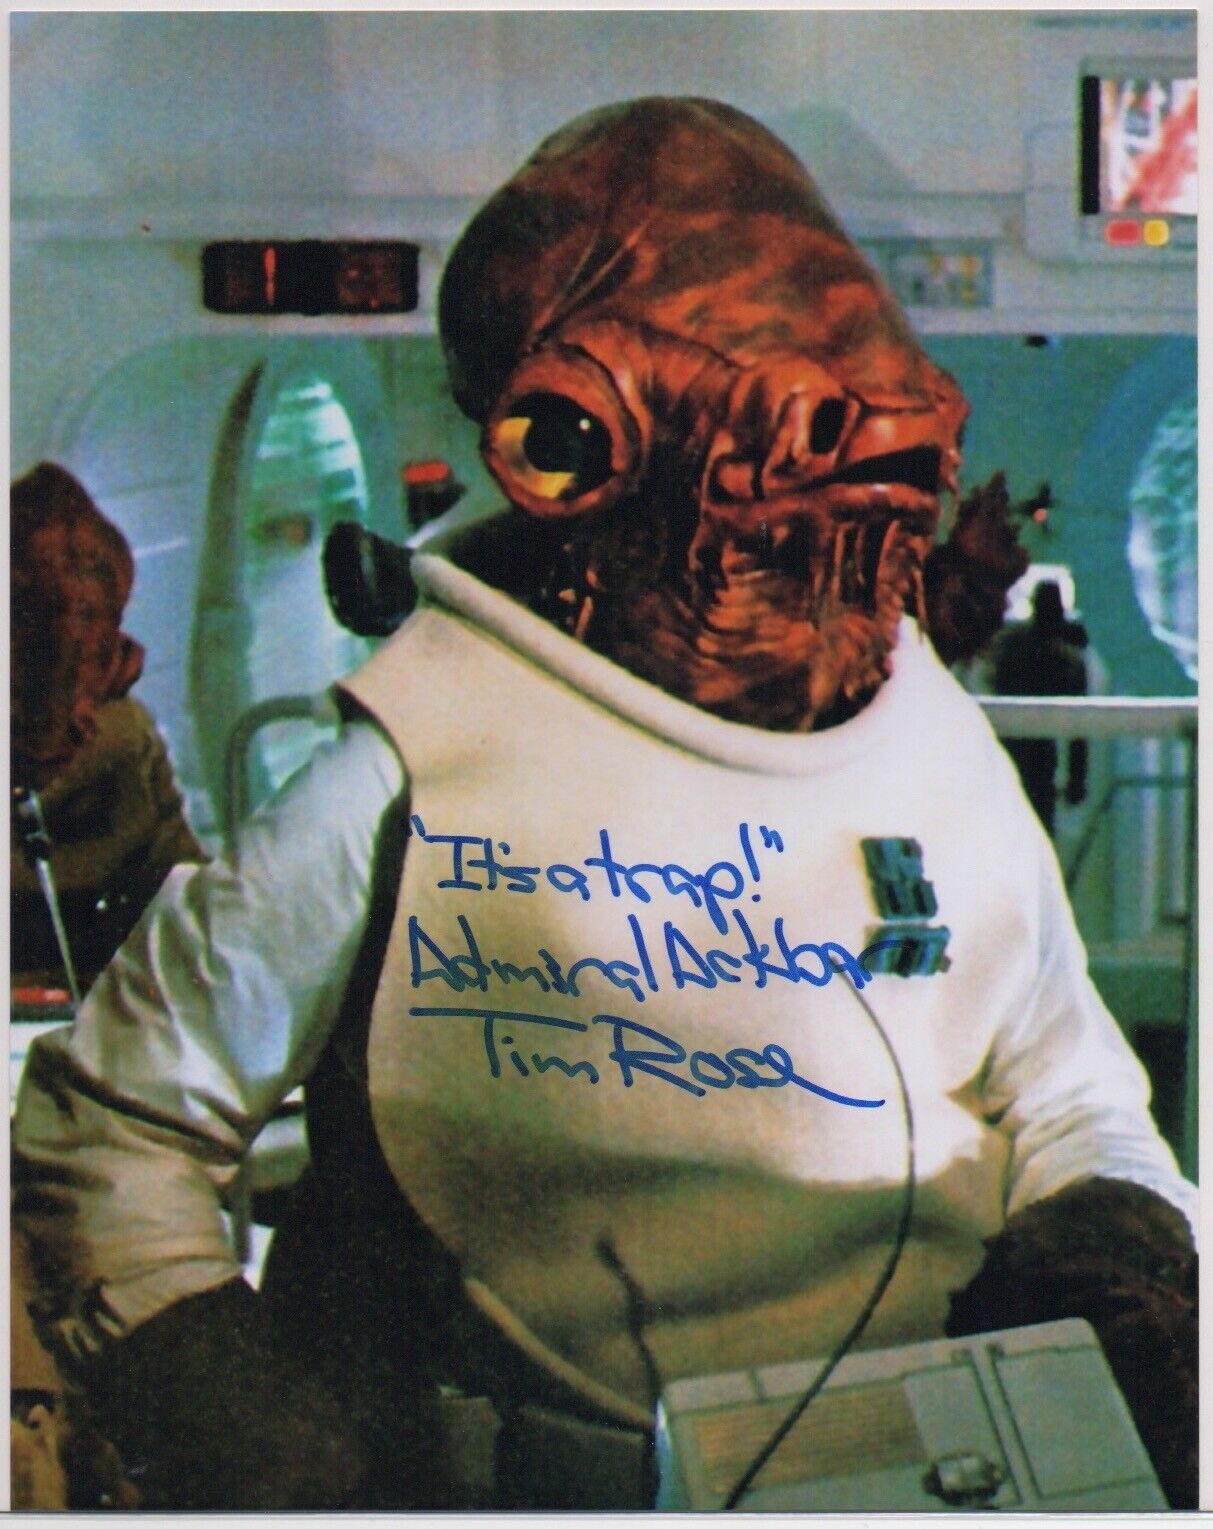 TIM ROSE signed Star Wars ROJ 8x10 Photo Poster painting AUTOGRAPH auto ACOA IT'S A TRAP!